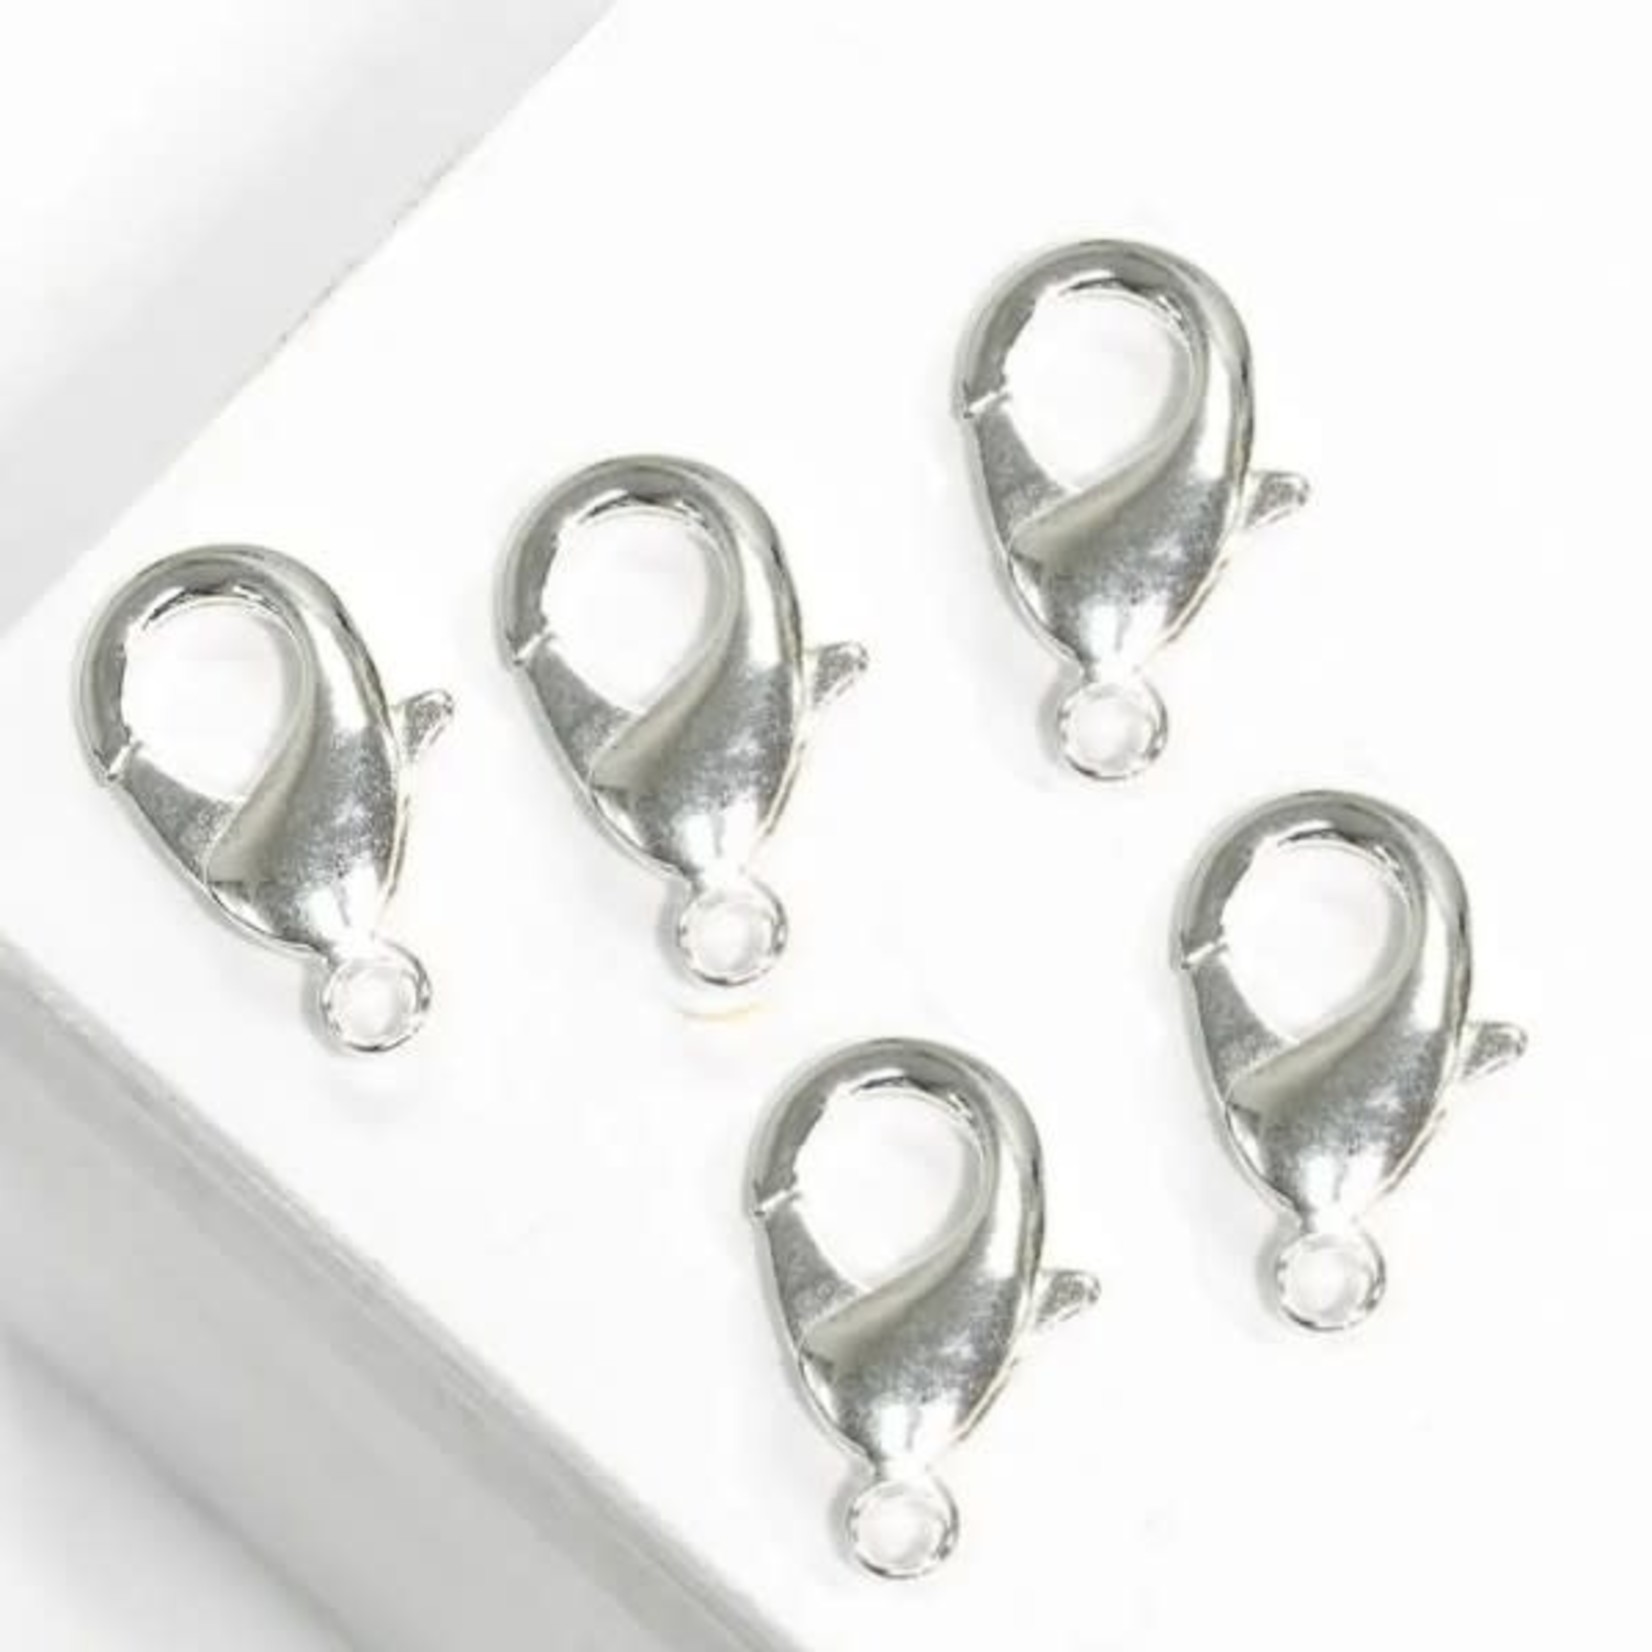 Lobster Clasp 19x10mm Nickel-Free Silver Plated - 5 pieces